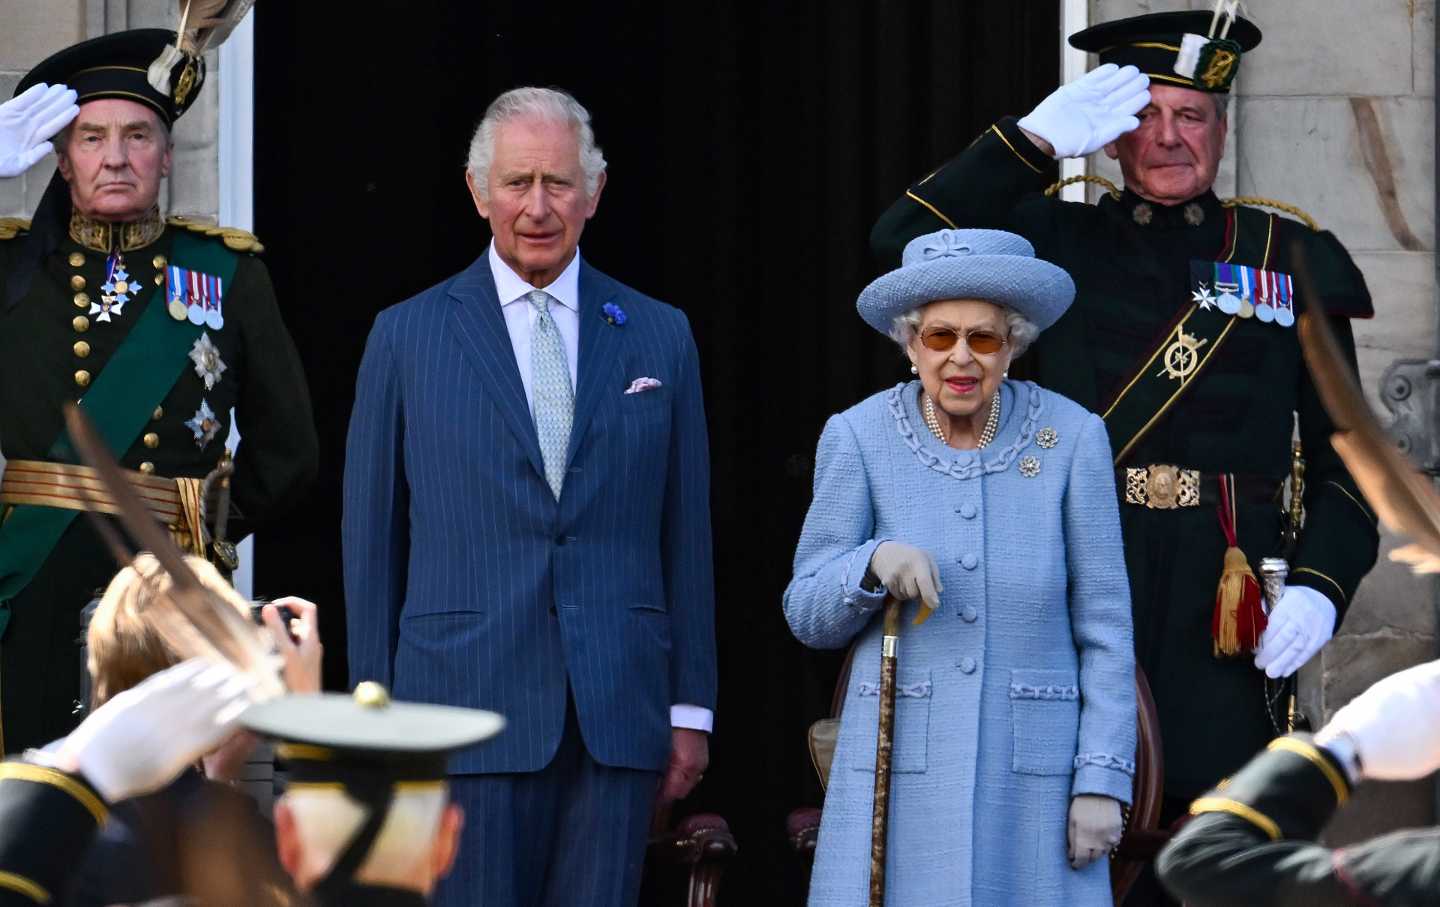 With Queen Elizabeth Gone, Monarchy’s Magic May Be Fading